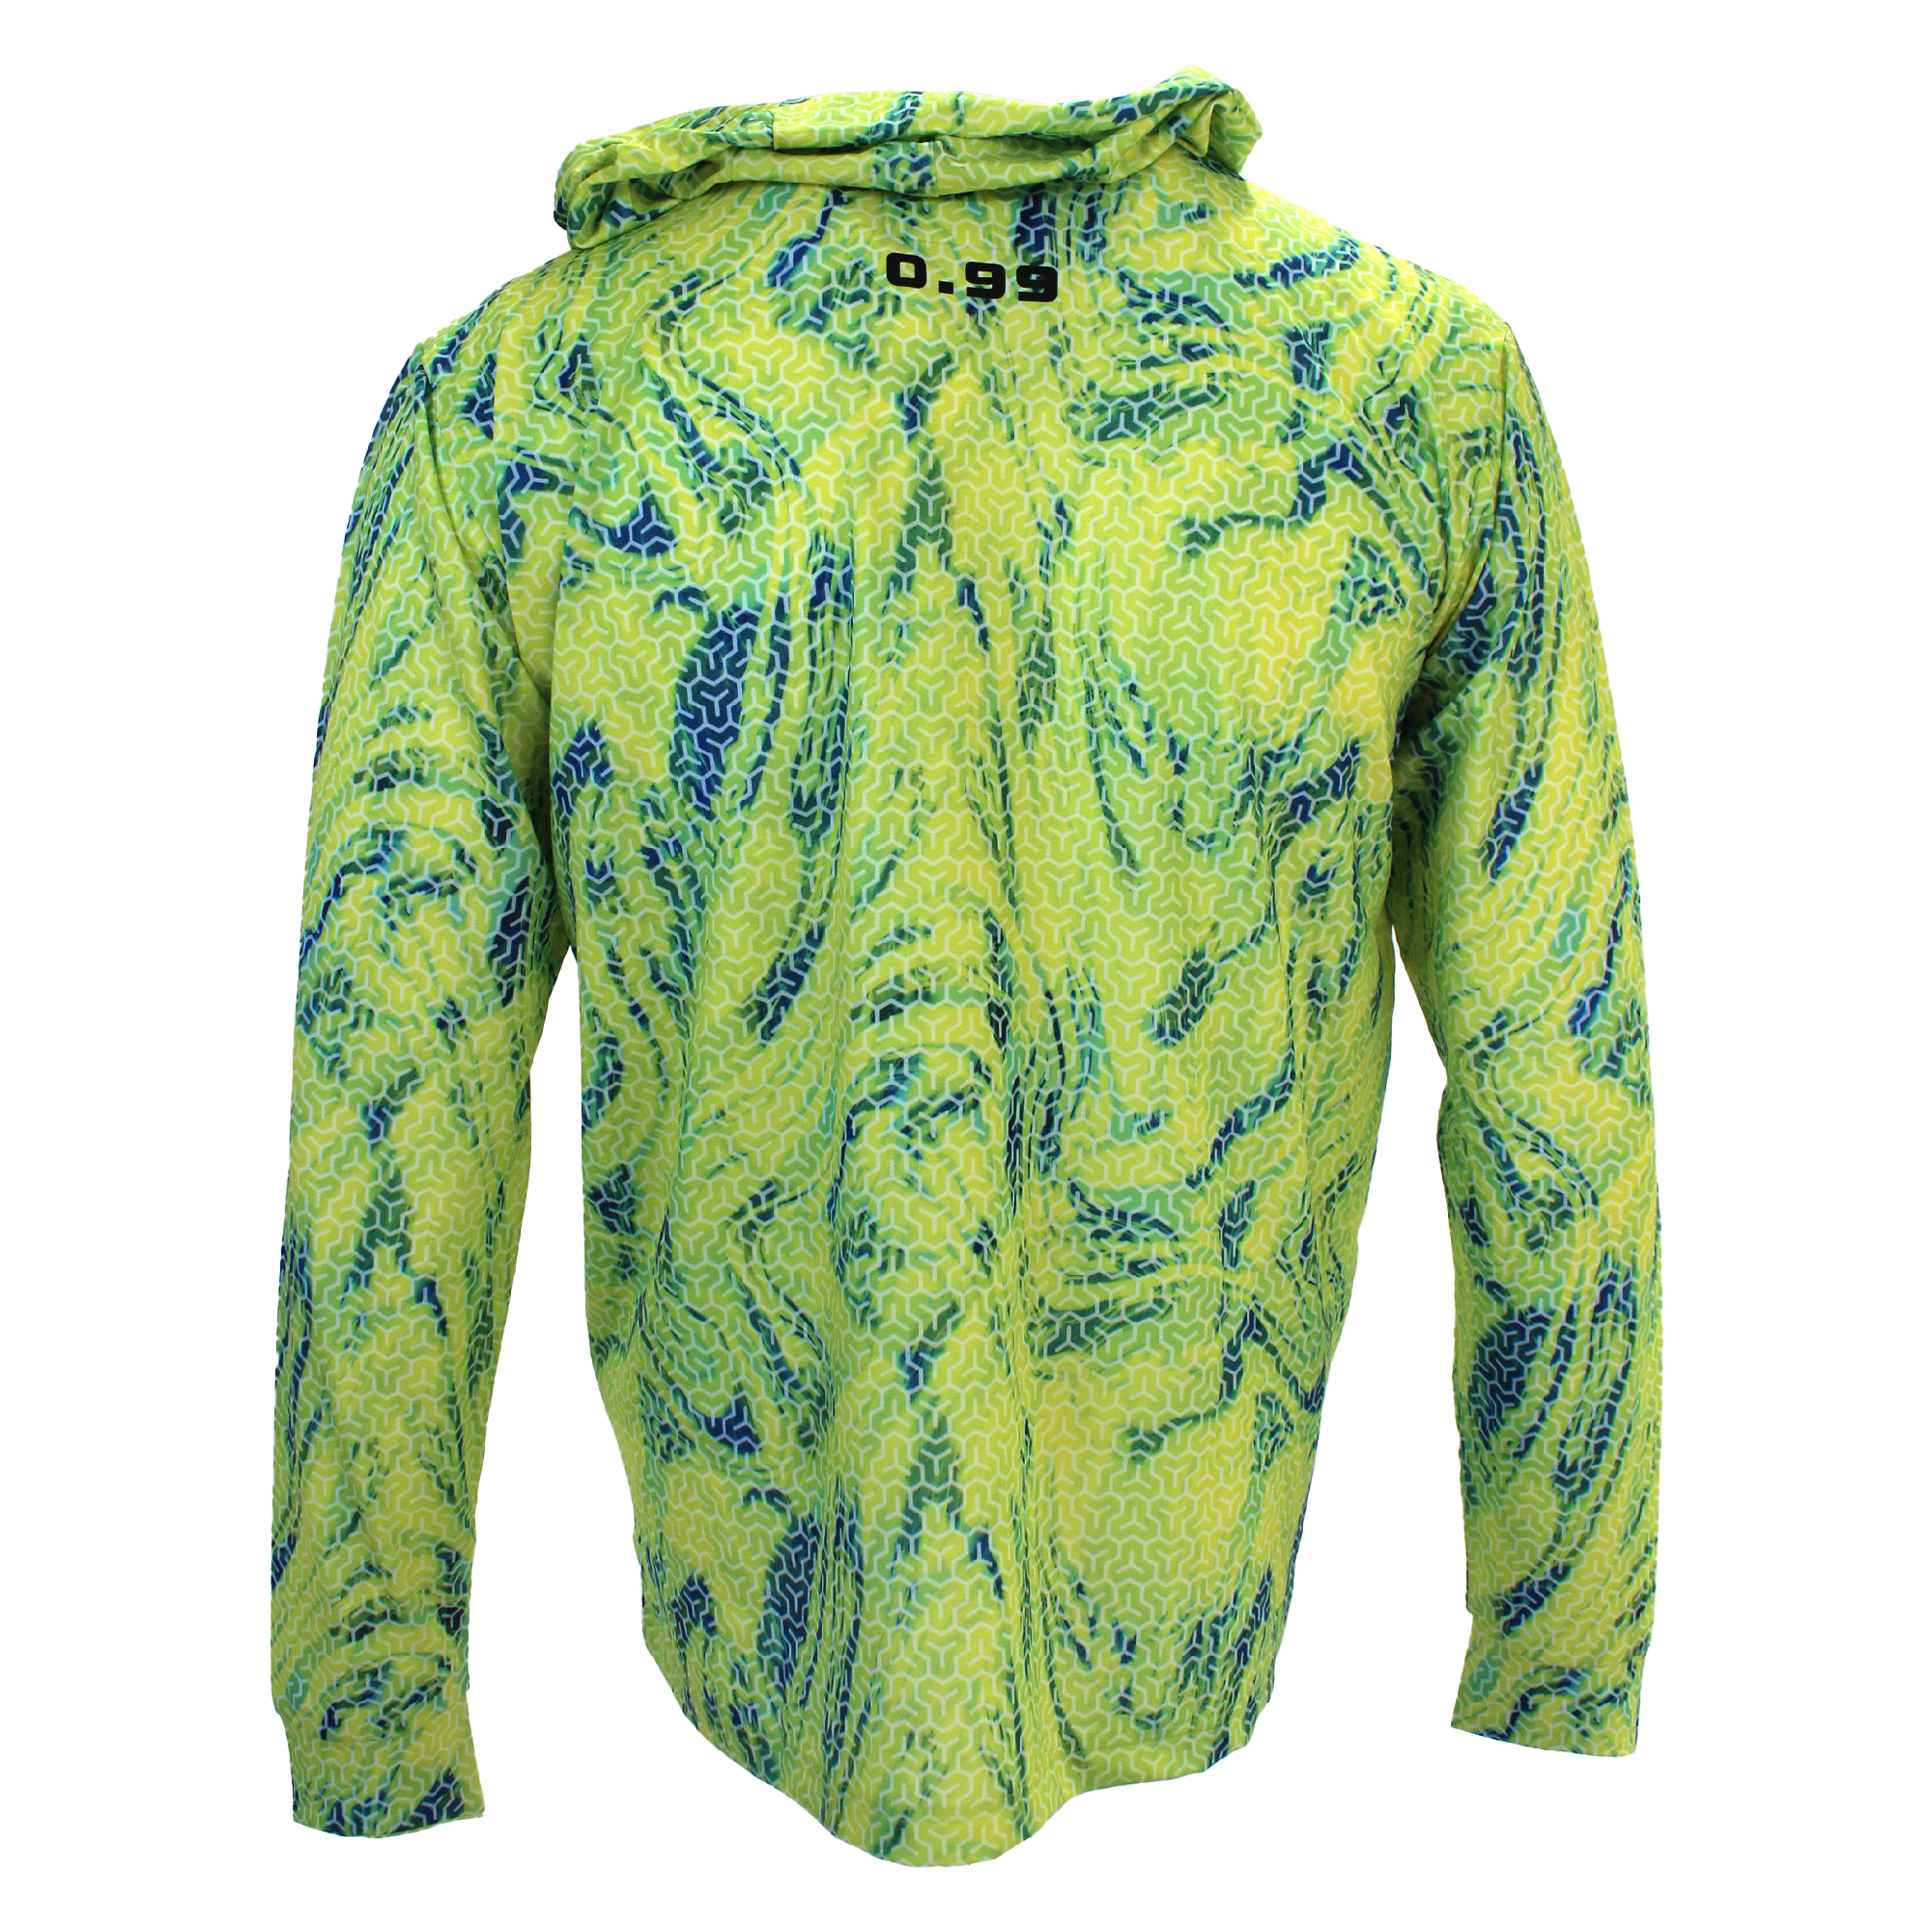 .99 Hooded Performance Long Sleeve Shirt - Trophy - Lime